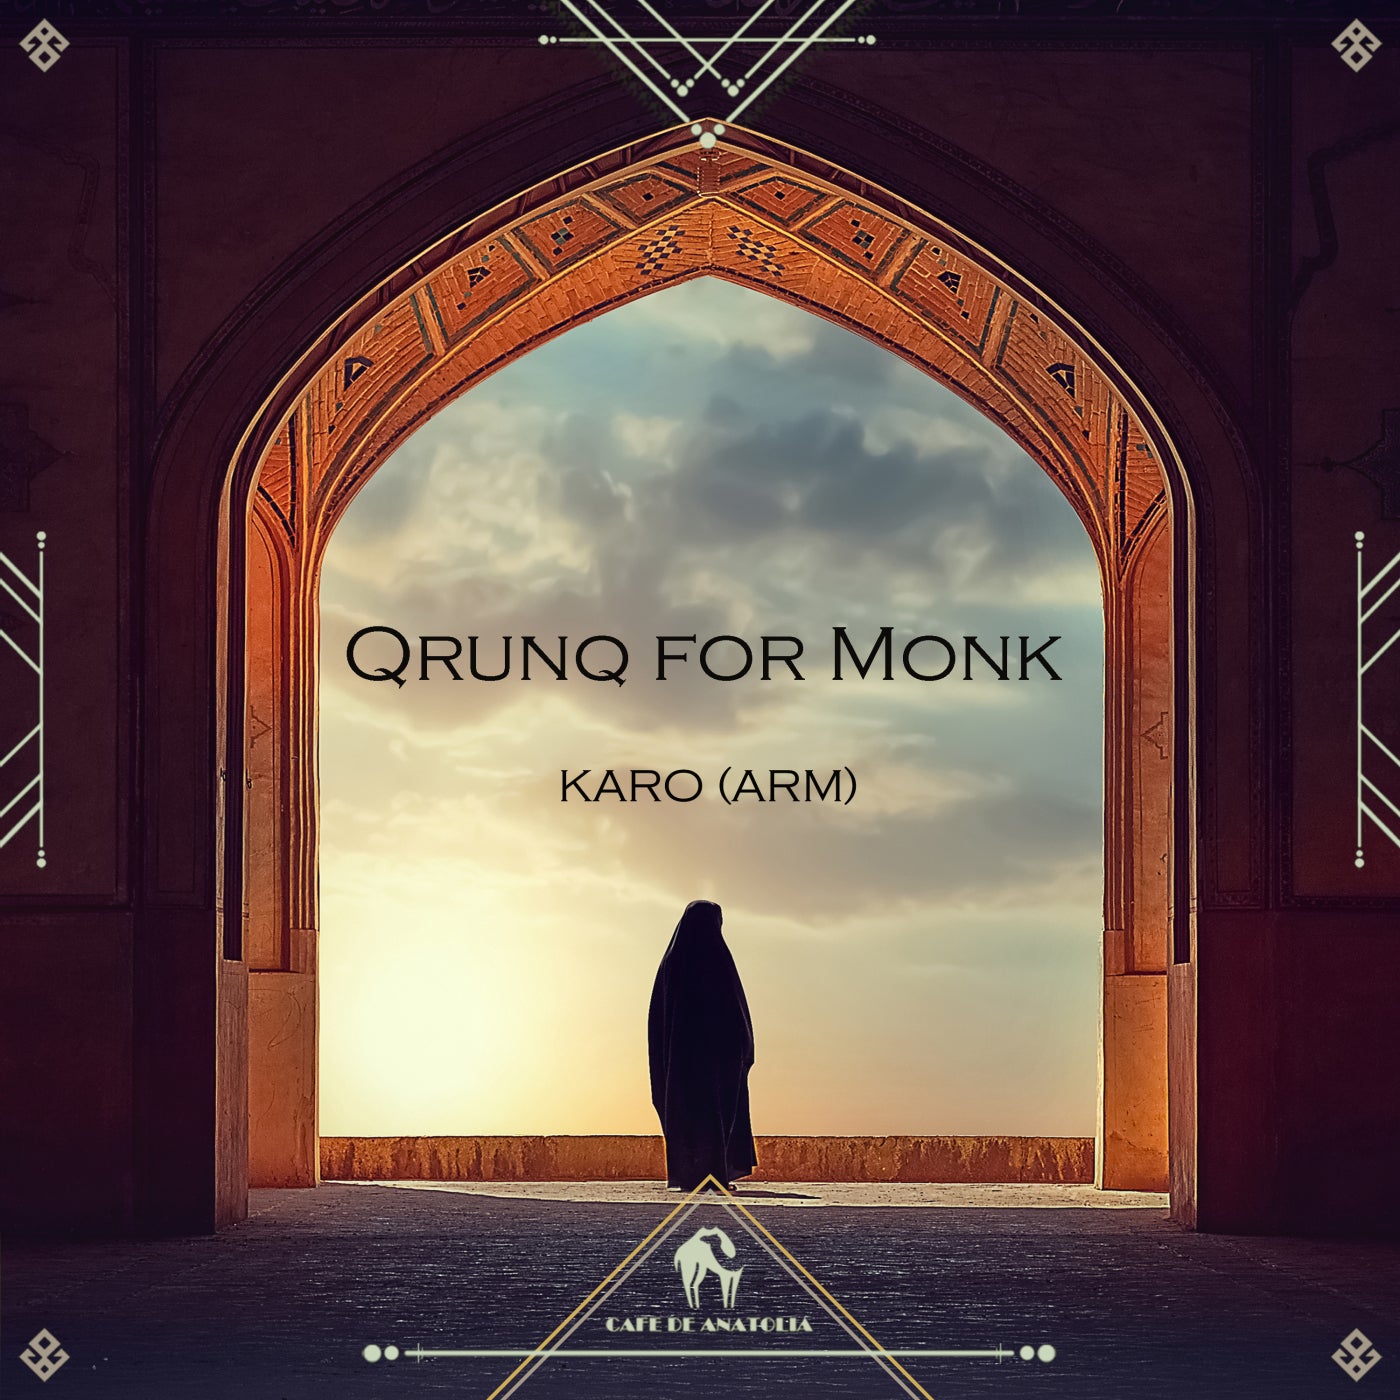 Qrunq for Monk